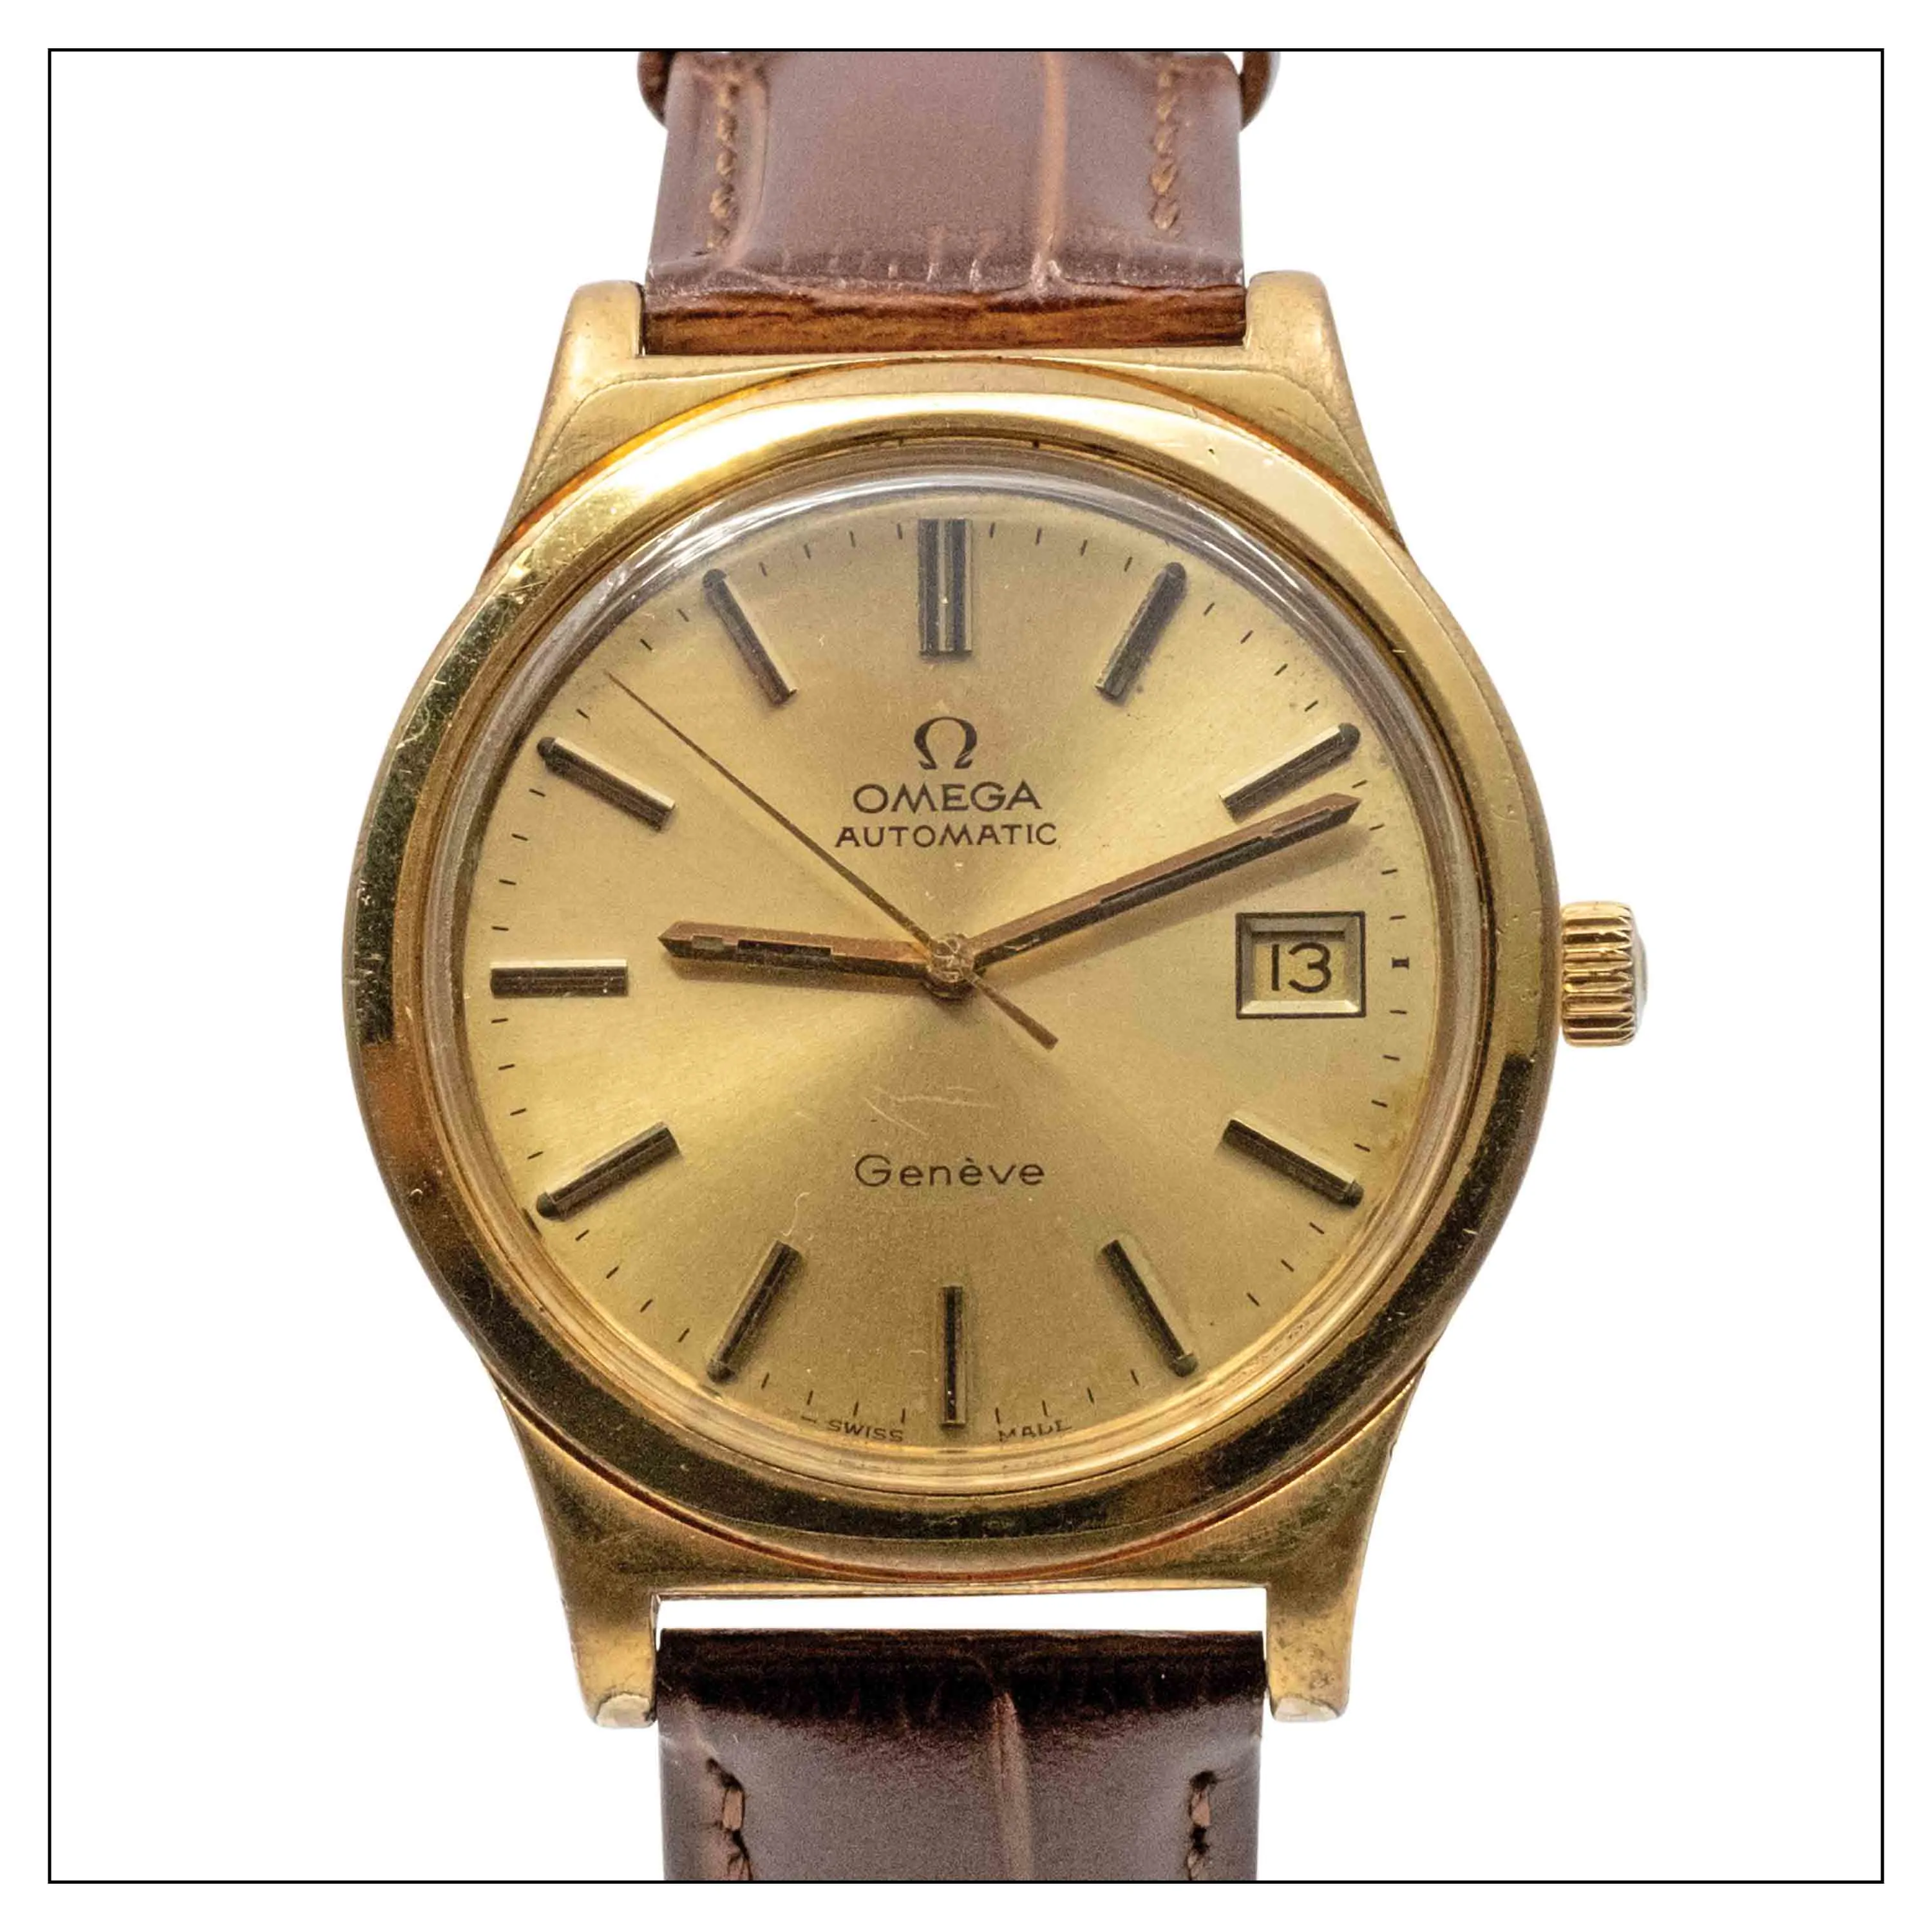 Omega Genève 166.0168 35mm Stainless steel and gold-plated Gold